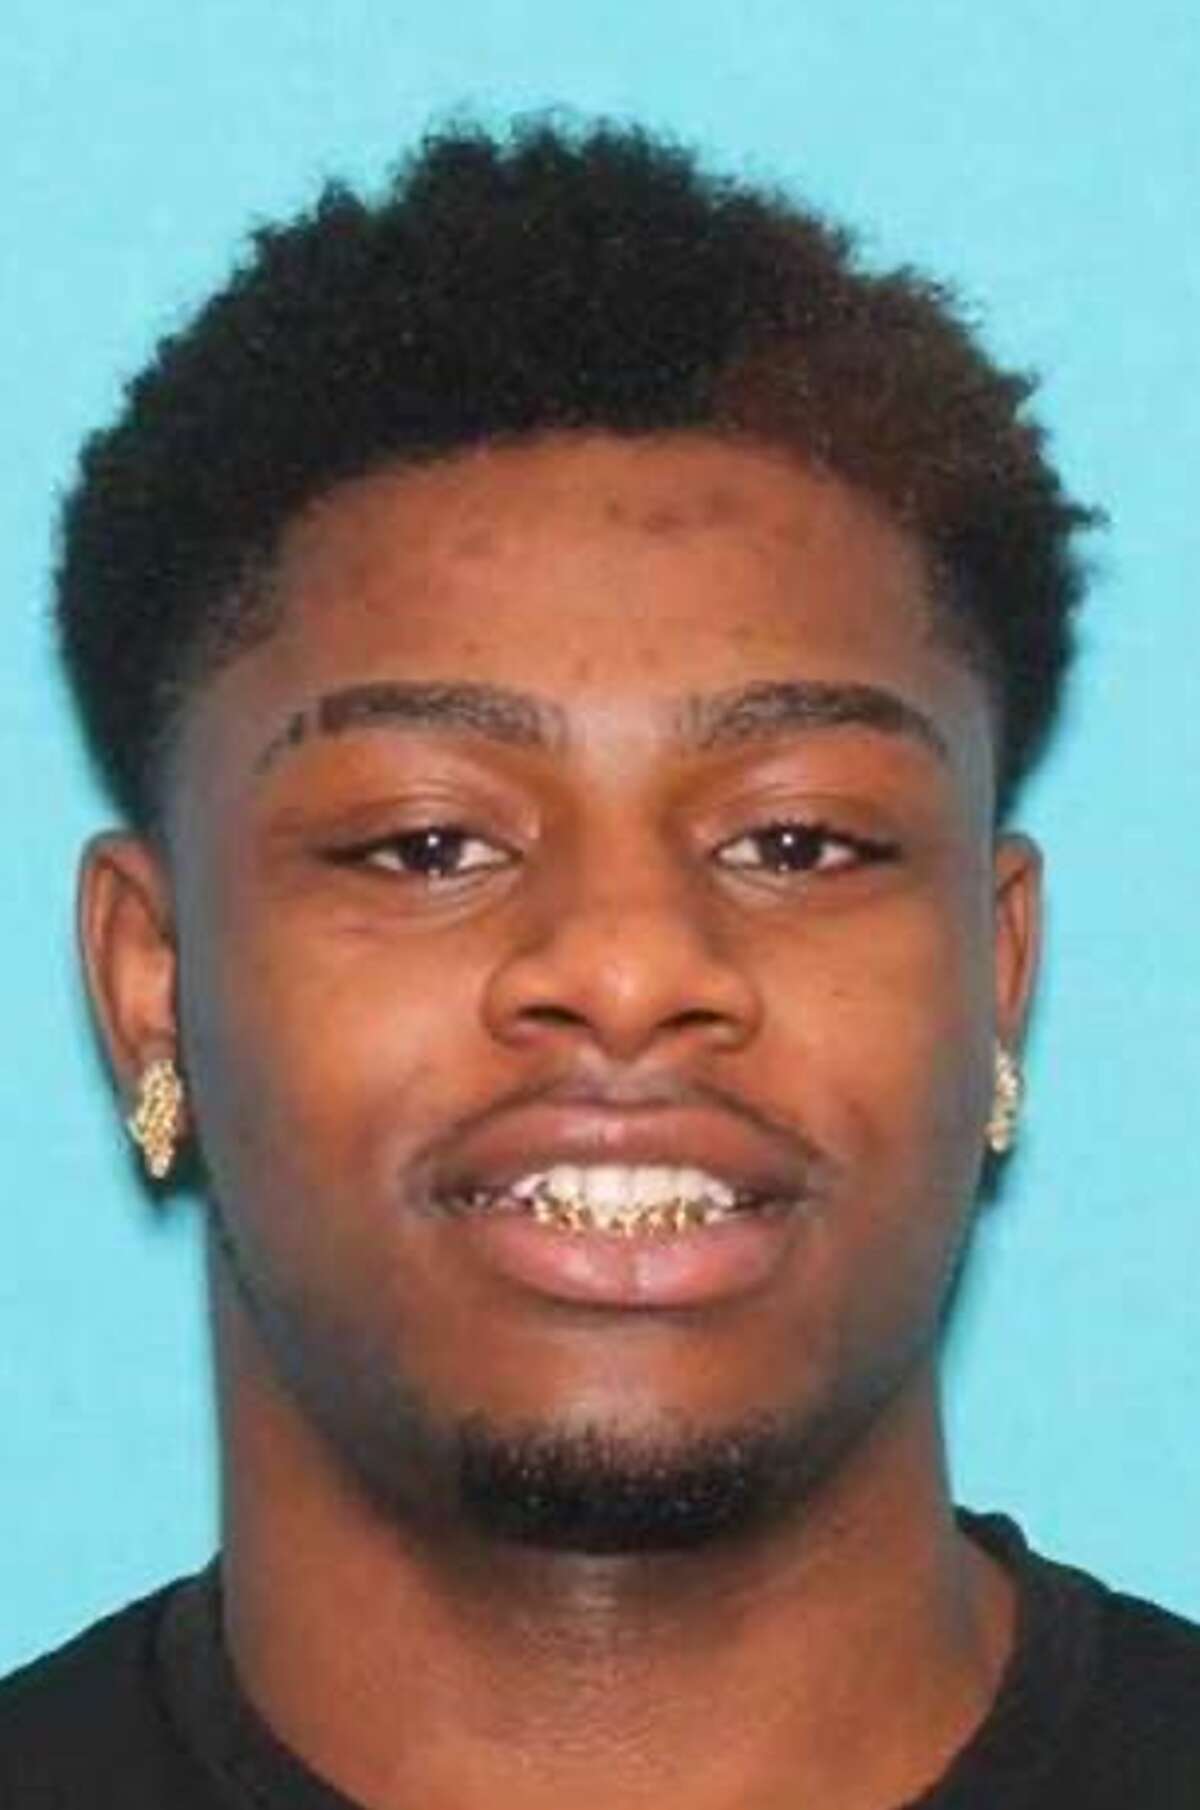 The Bexar County Sheriff's Office is searching for 18-year-old James Alexander Miller in connection with a double shooting that left a teenager dead on the Northeast Side.